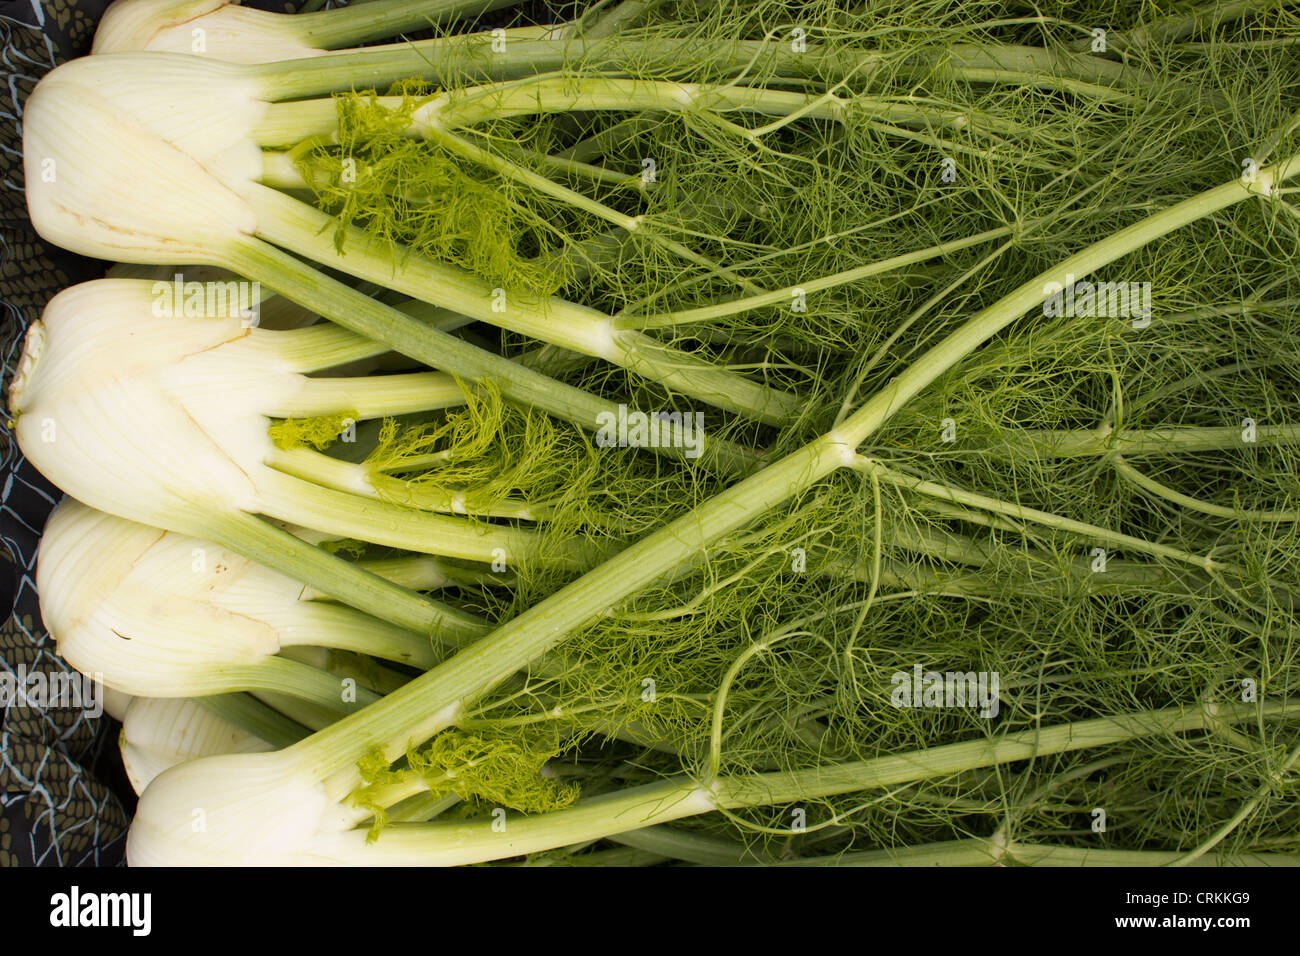 display of fennel at a farmer's market, New Brunswick, New Jersey, USA Stock Photo